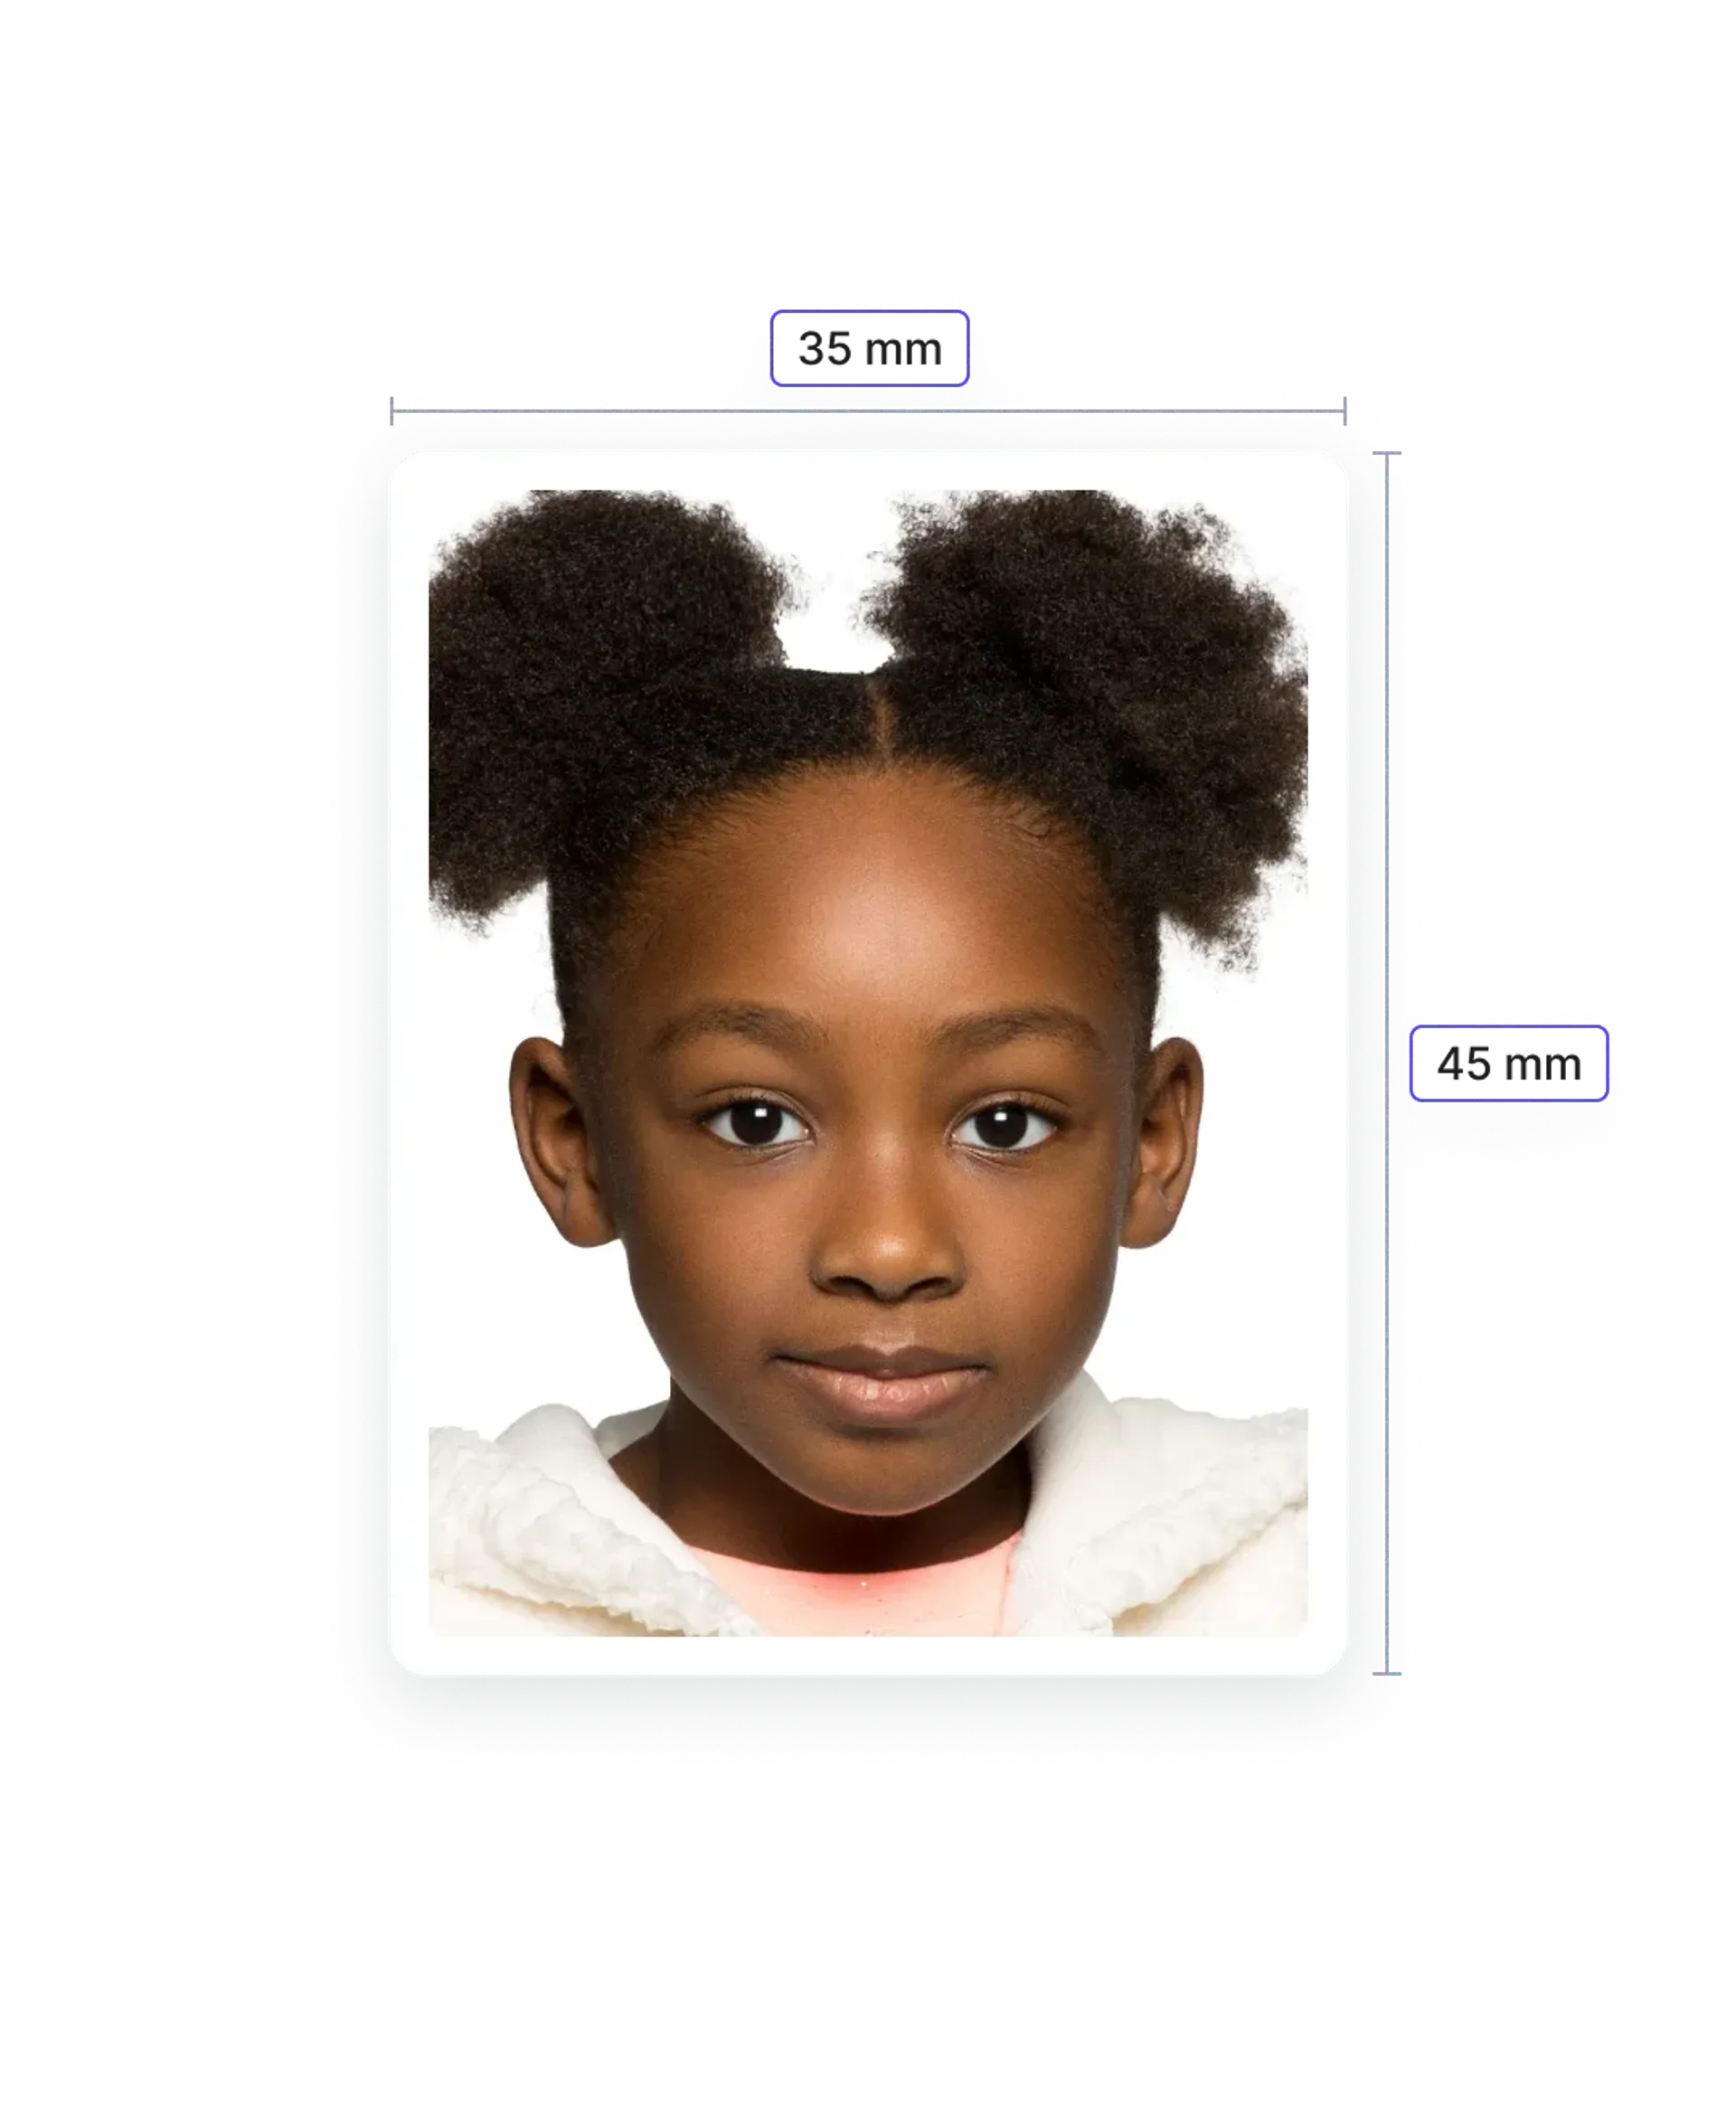 South African Baby Passport Photo - Size and Requirements